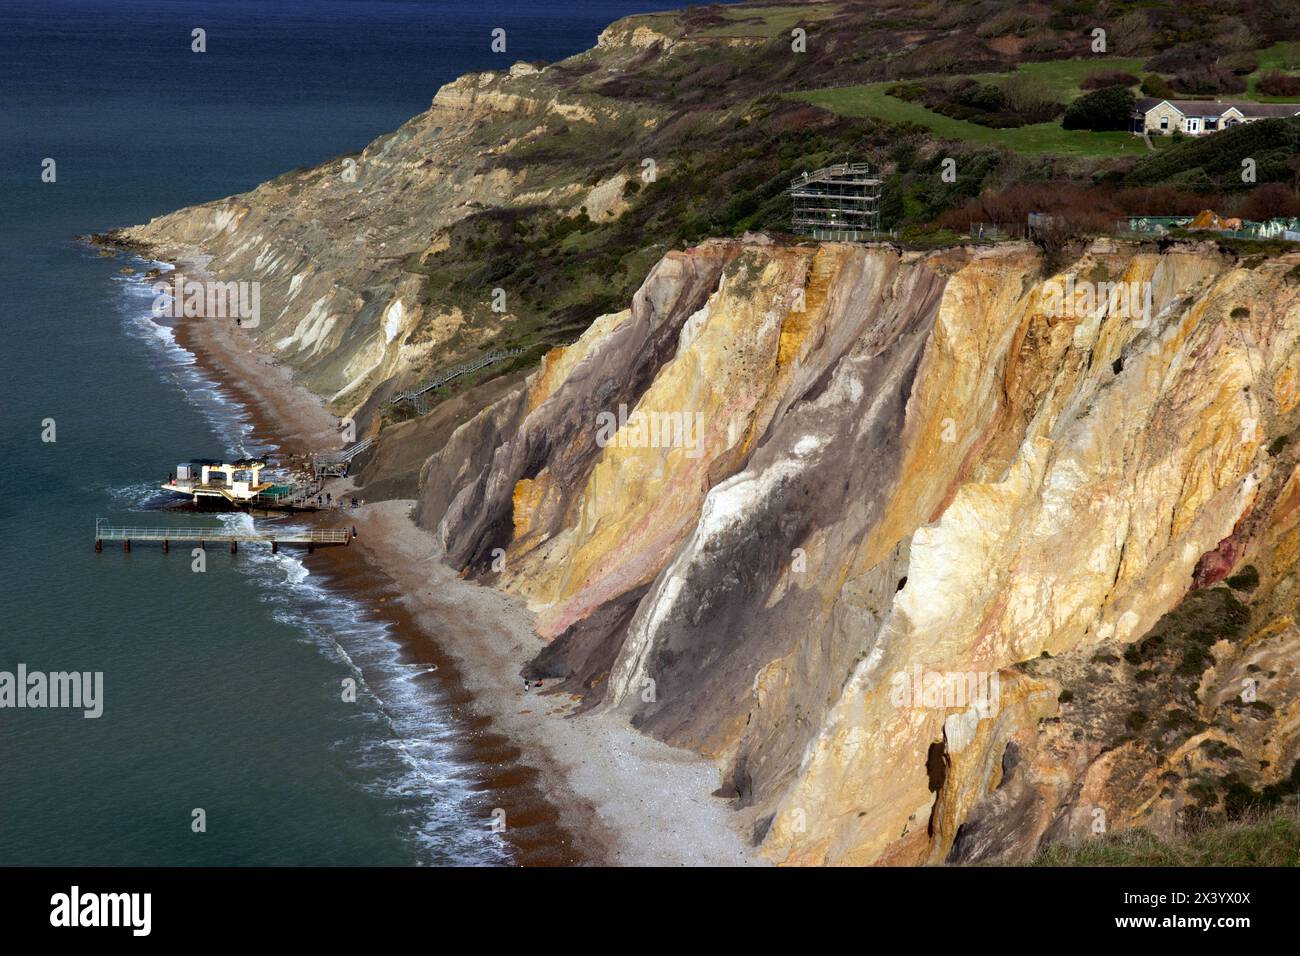 The multi-coloured sand cliffs of Alum Bay are a geological curiosity and tourist attraction on the west coast of the Isle of Wight, near the Needles. Stock Photo